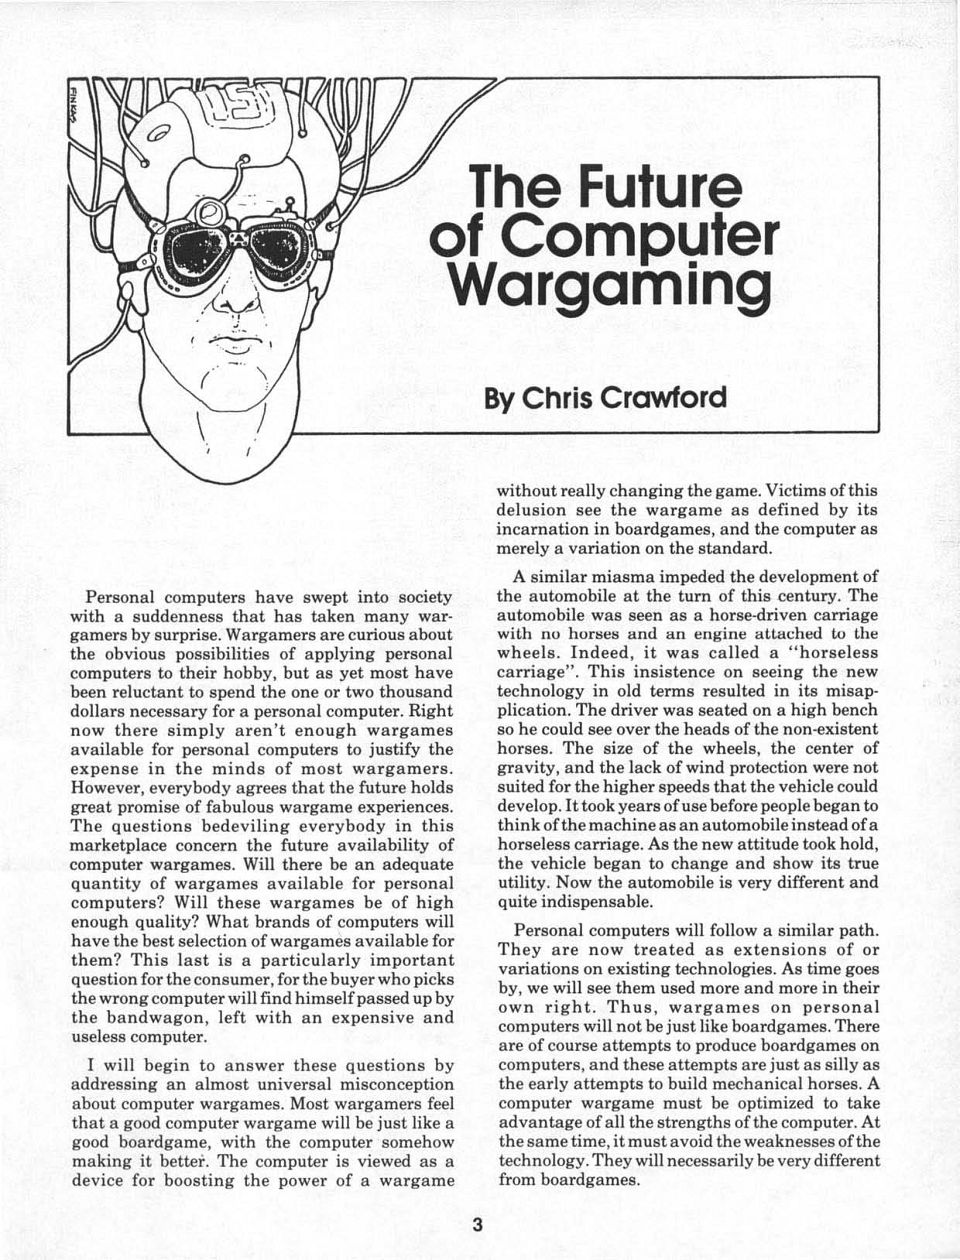 The Future of Computer Wargaming